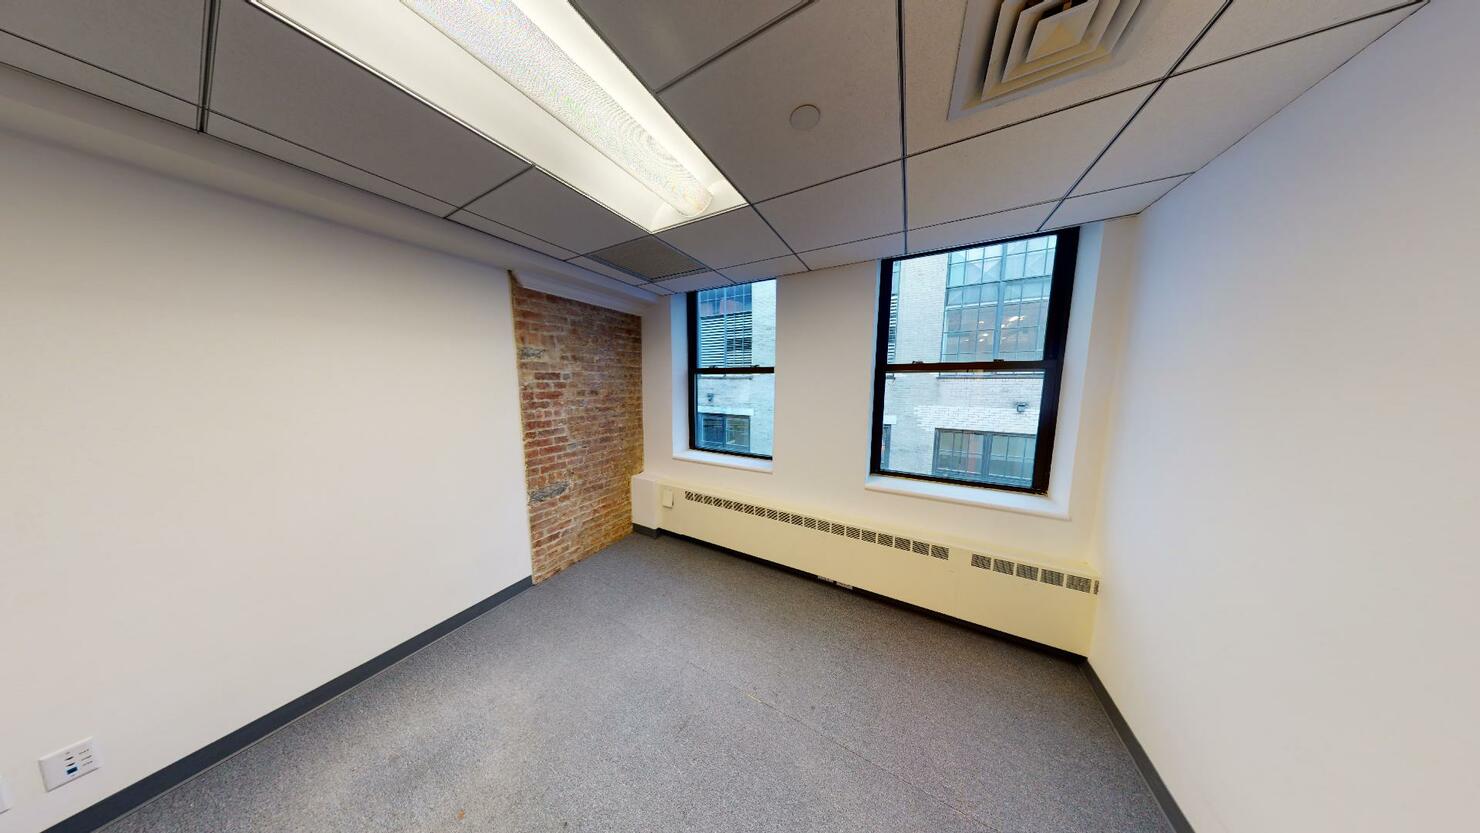 483 Tenth Avenue Office Space - Large Windows